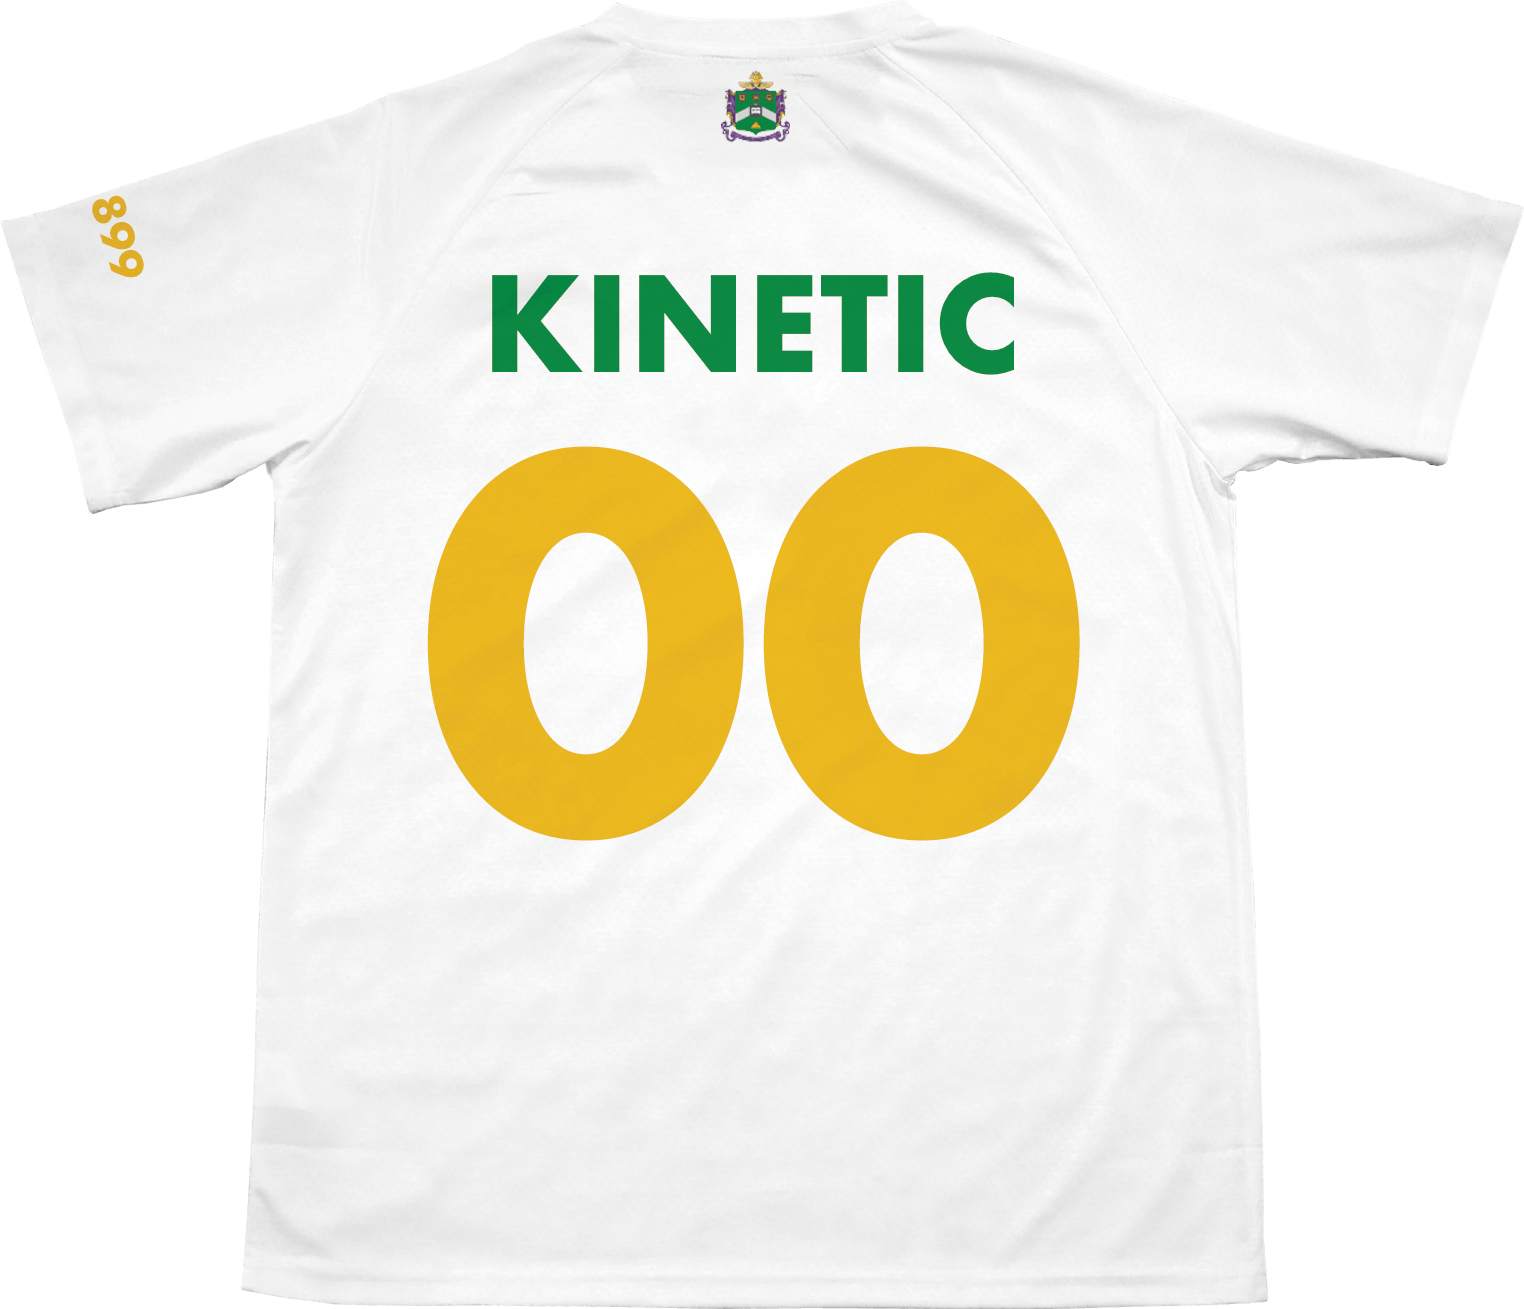 Delta Sigma Phi - Home Team Soccer Jersey - Kinetic Society